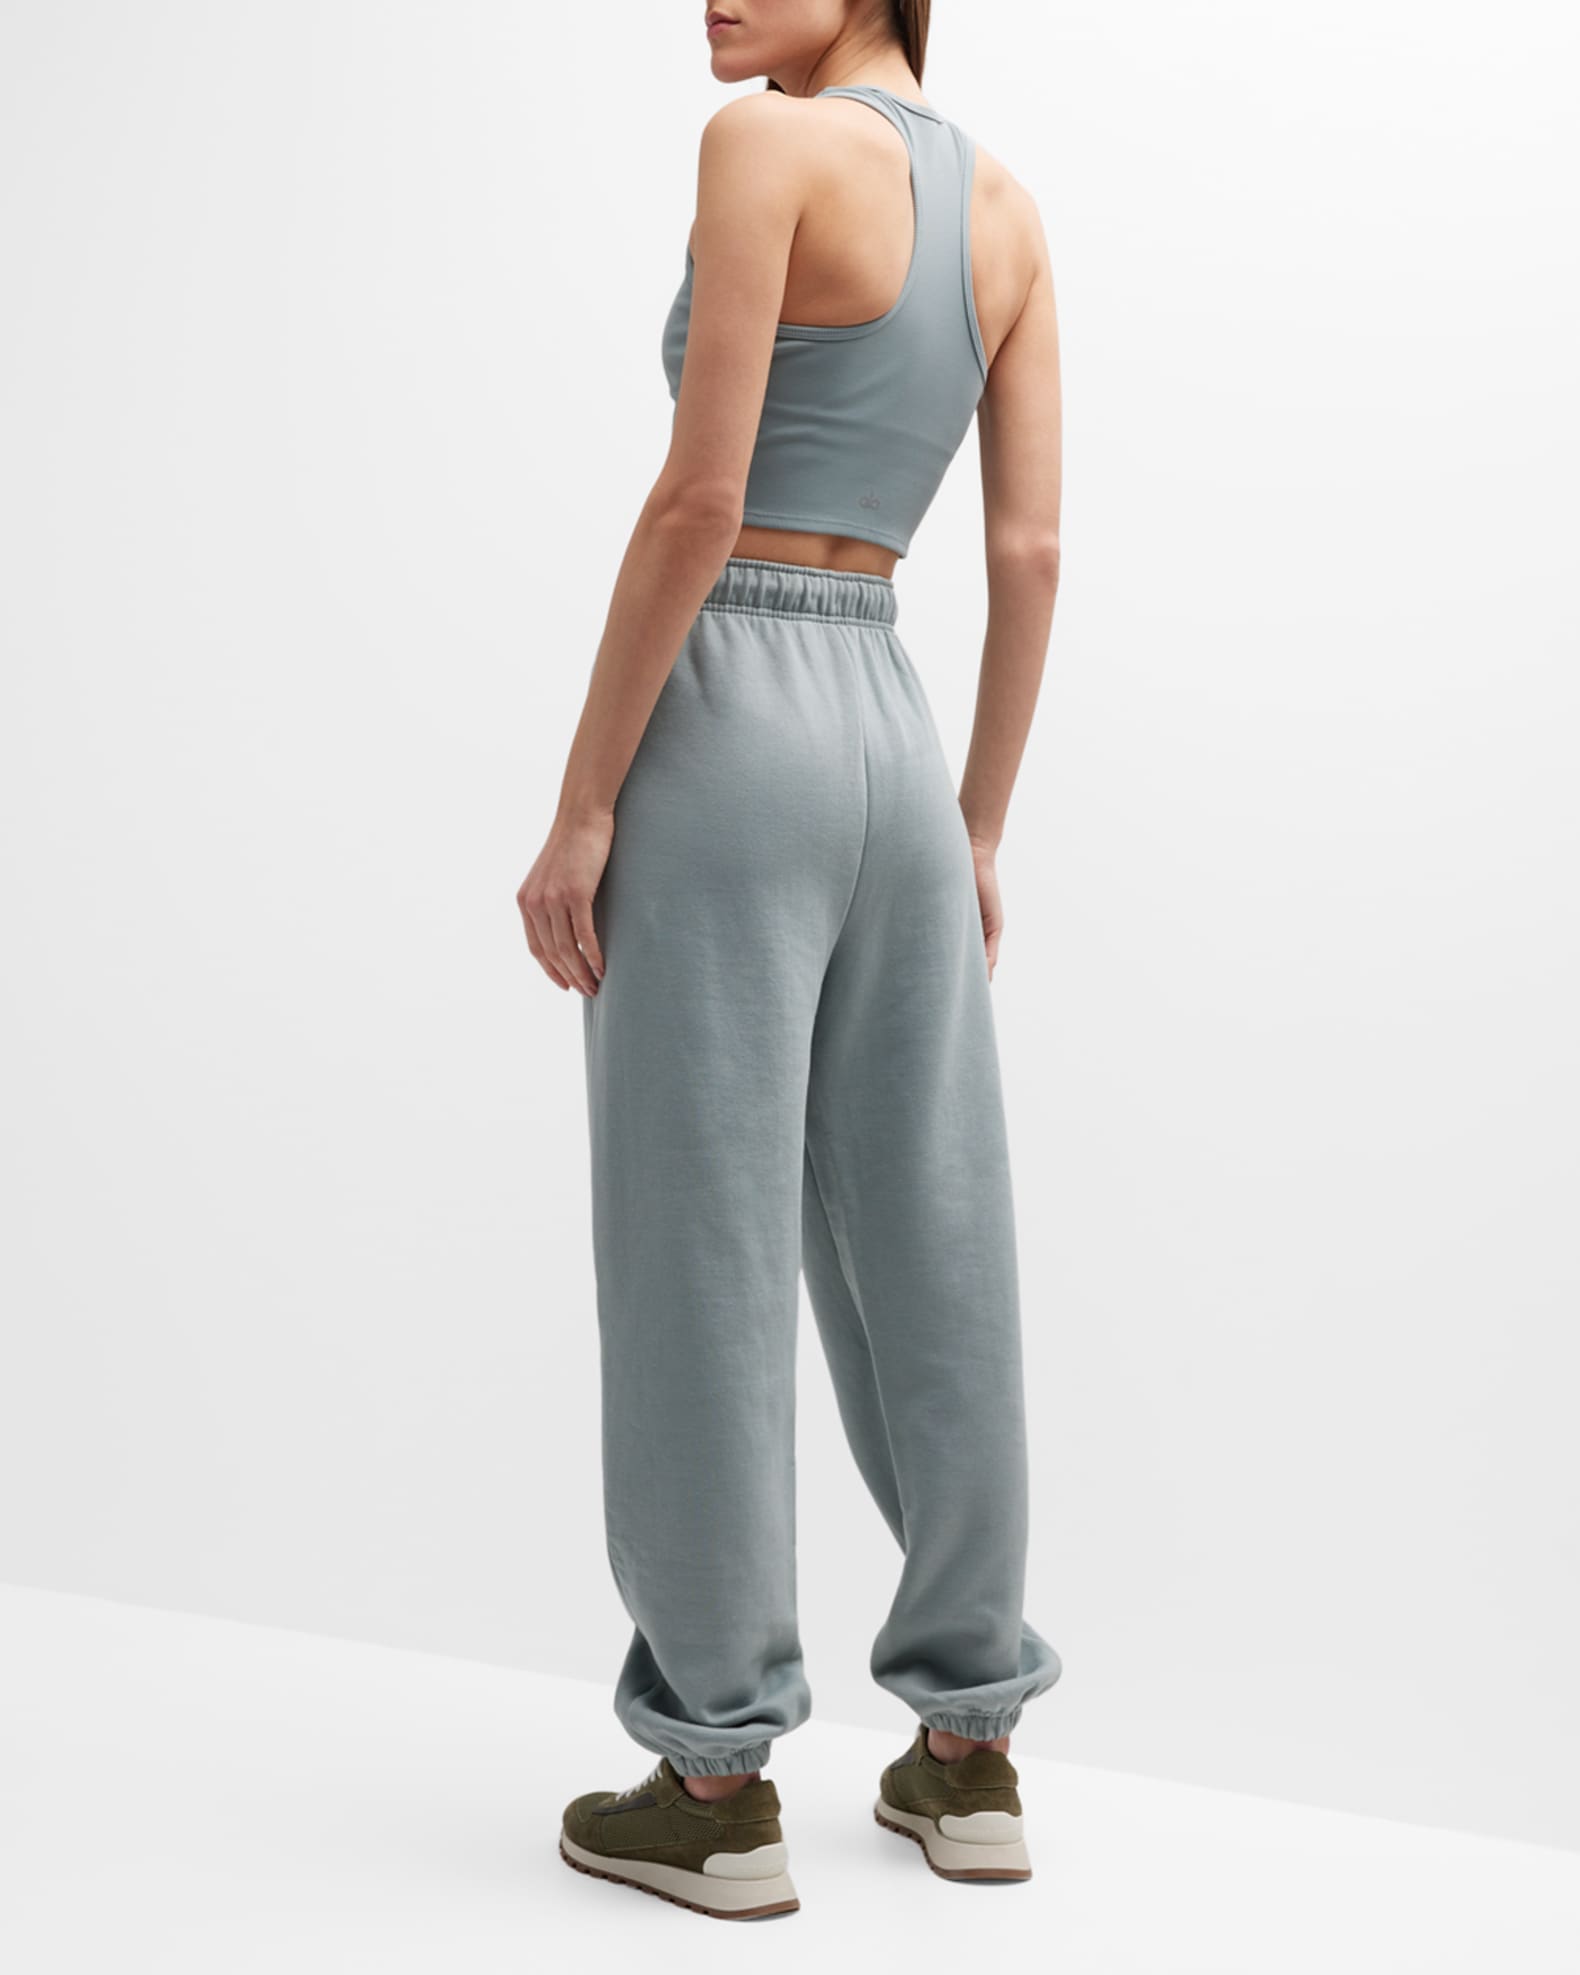 alo Accolade Sweatpant in Cosmic Grey